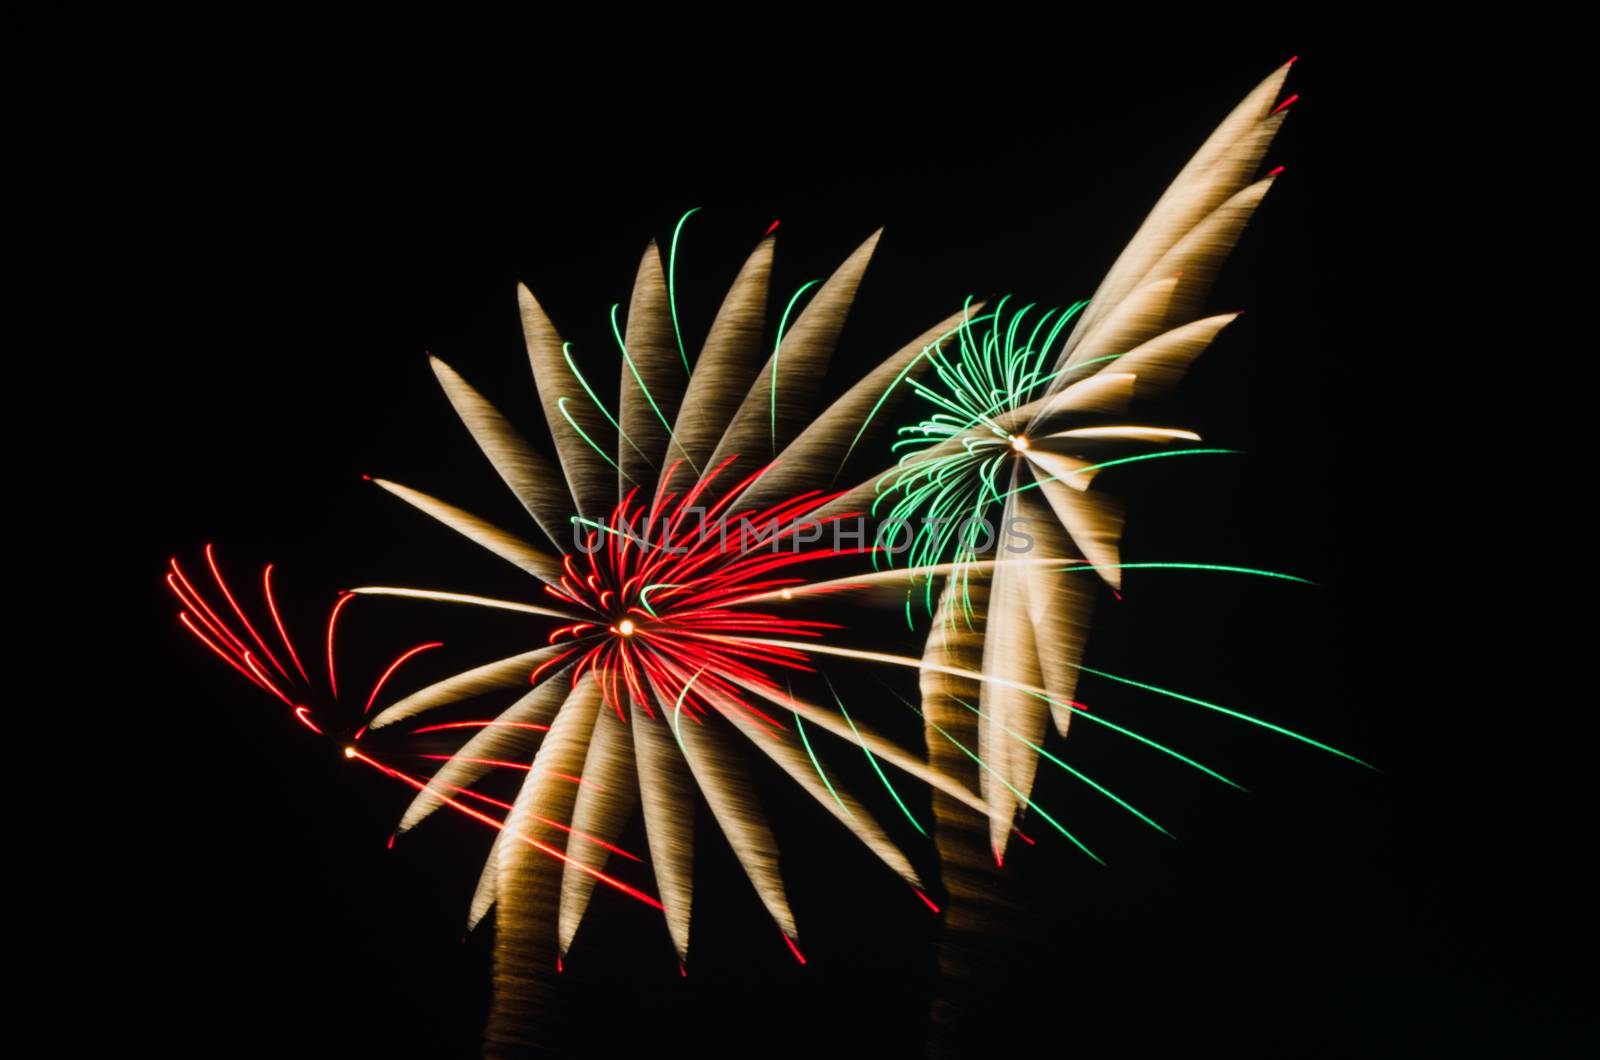 An image of exploding fireworks at night by nop16